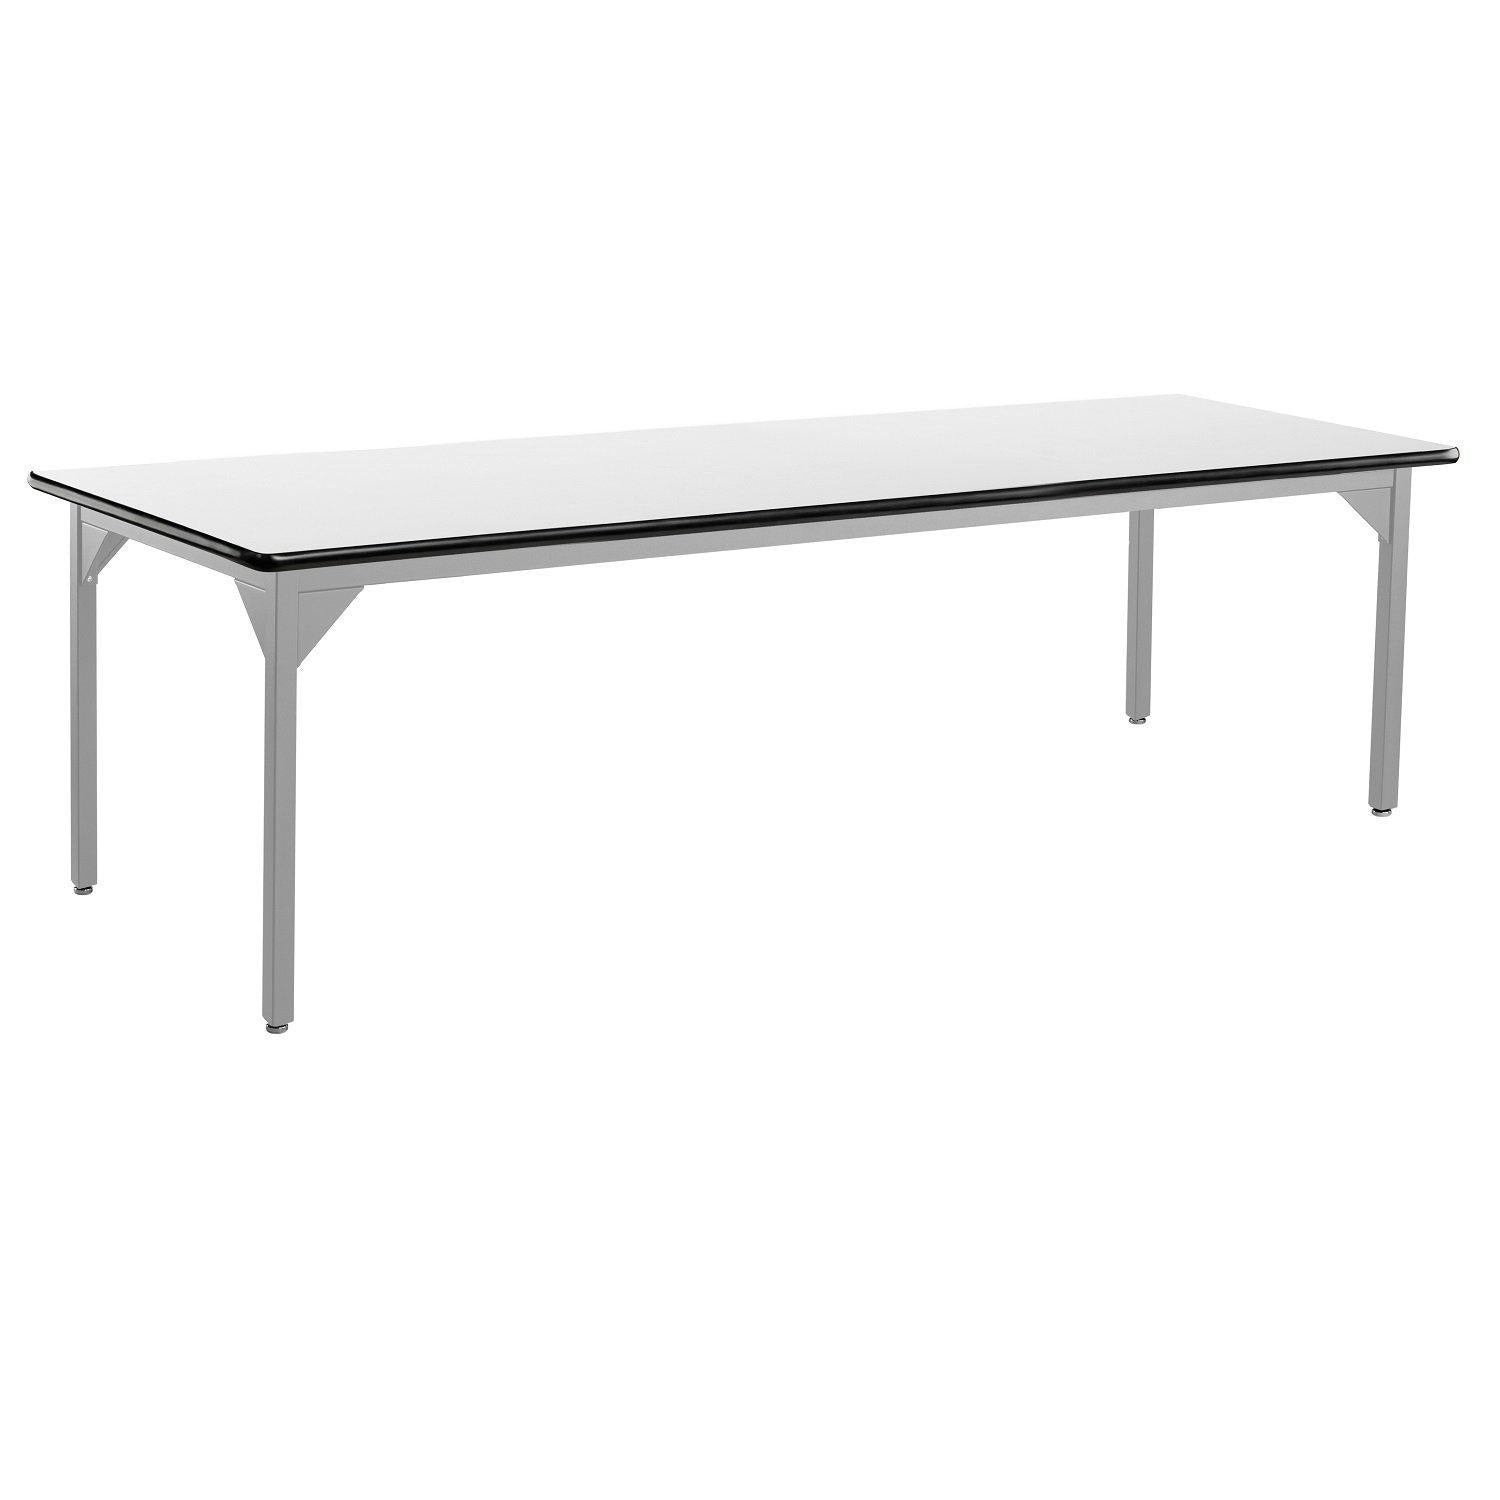 Heavy-Duty Fixed Height Utility Table, Soft Grey Frame, 36" x 84", Whiteboard High-Pressure Laminate Top